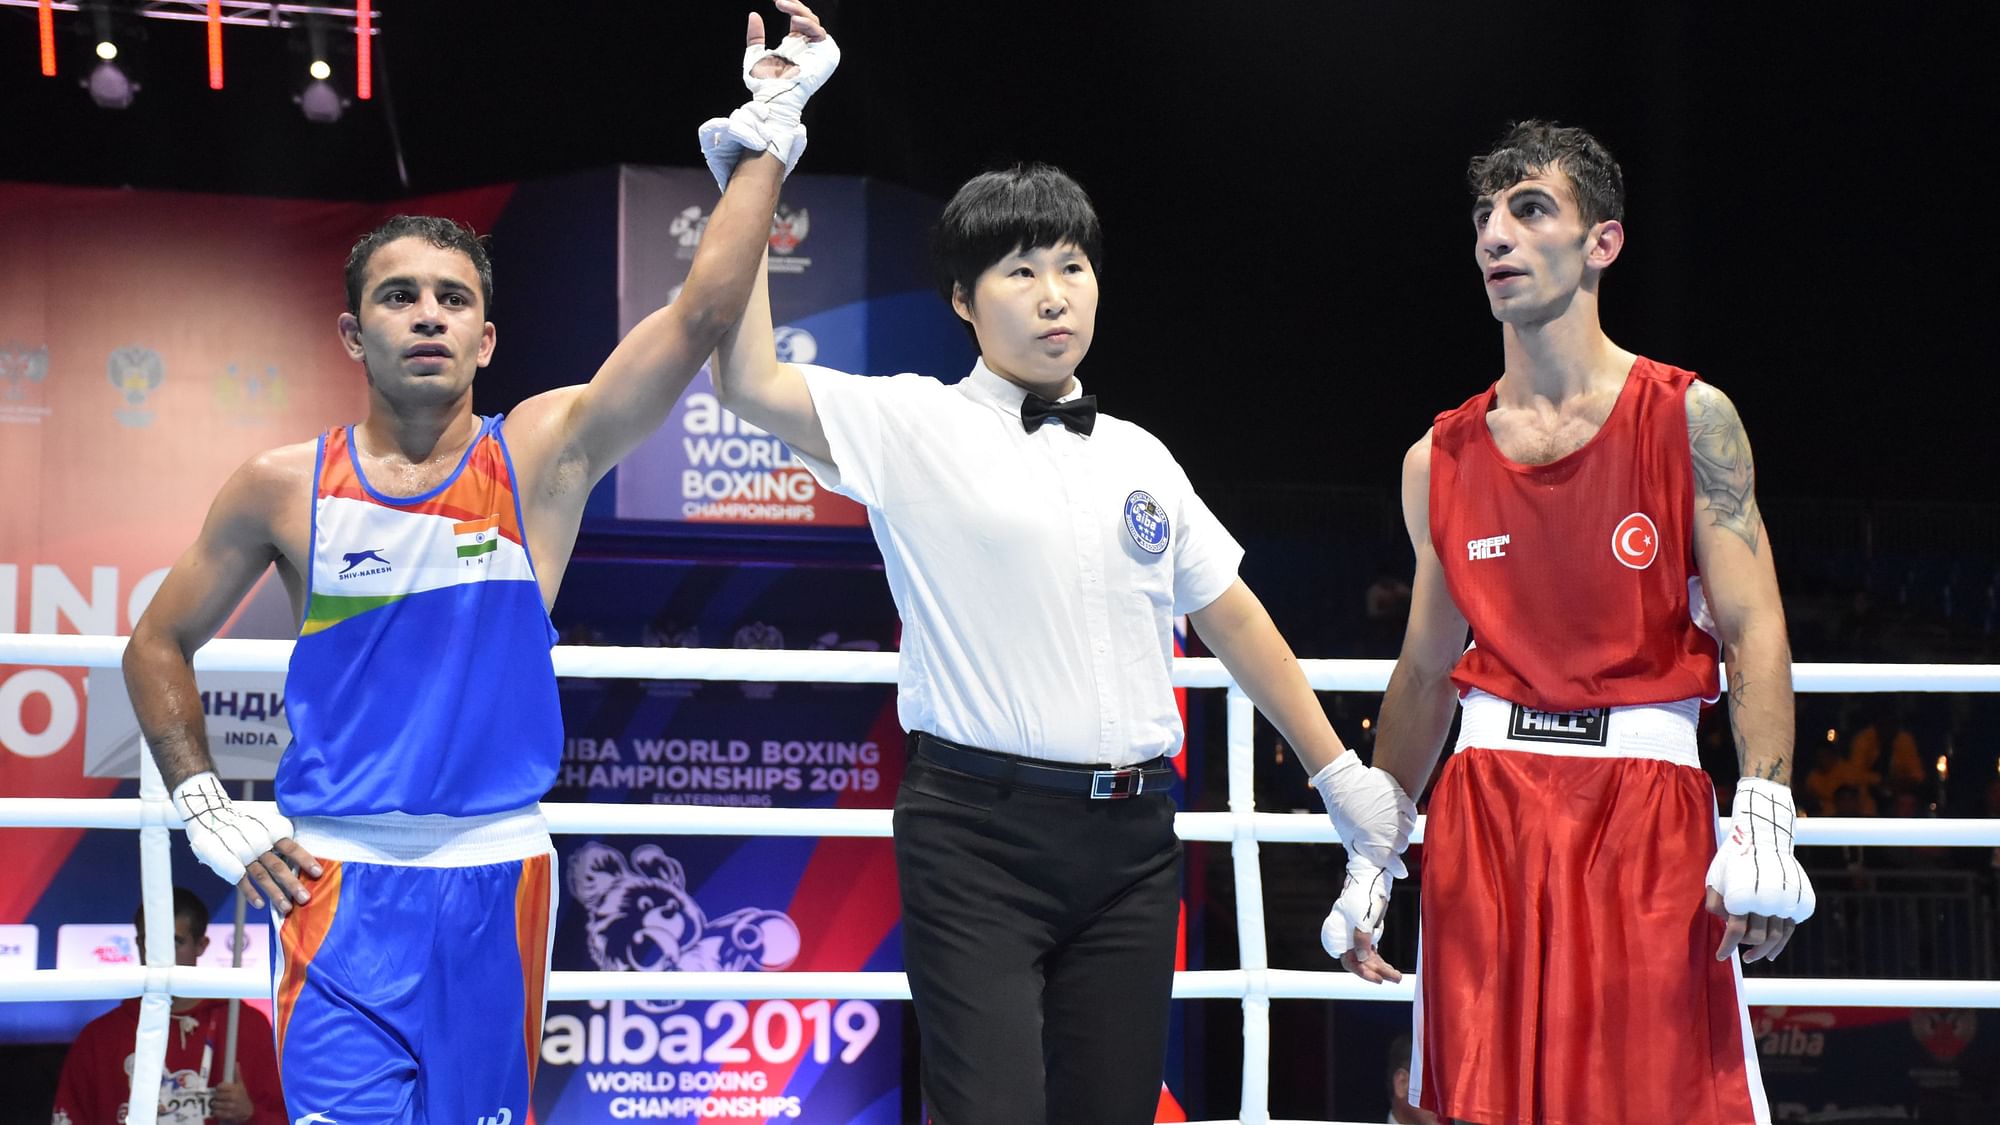 Amit Panghal (52kg) has advanced to the quarterfinals of the Boxing World Championships.